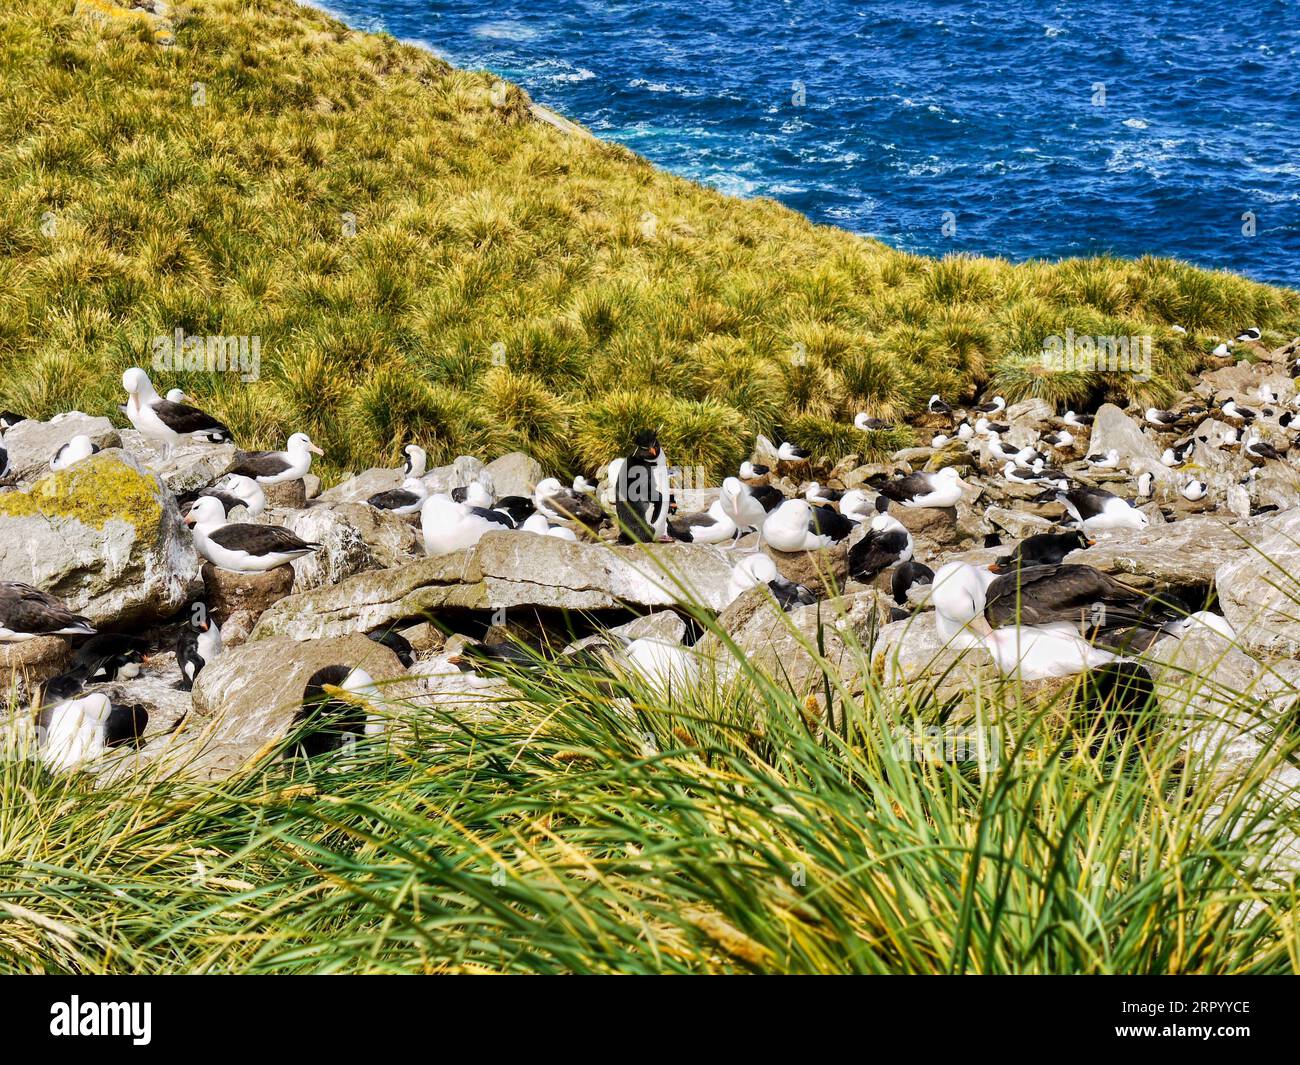 In the Falkland Islands a rookery of black-browed albatrosses (Thalassarche melanophris) with a few southern rockhopper penguins, nesting. Stock Photo